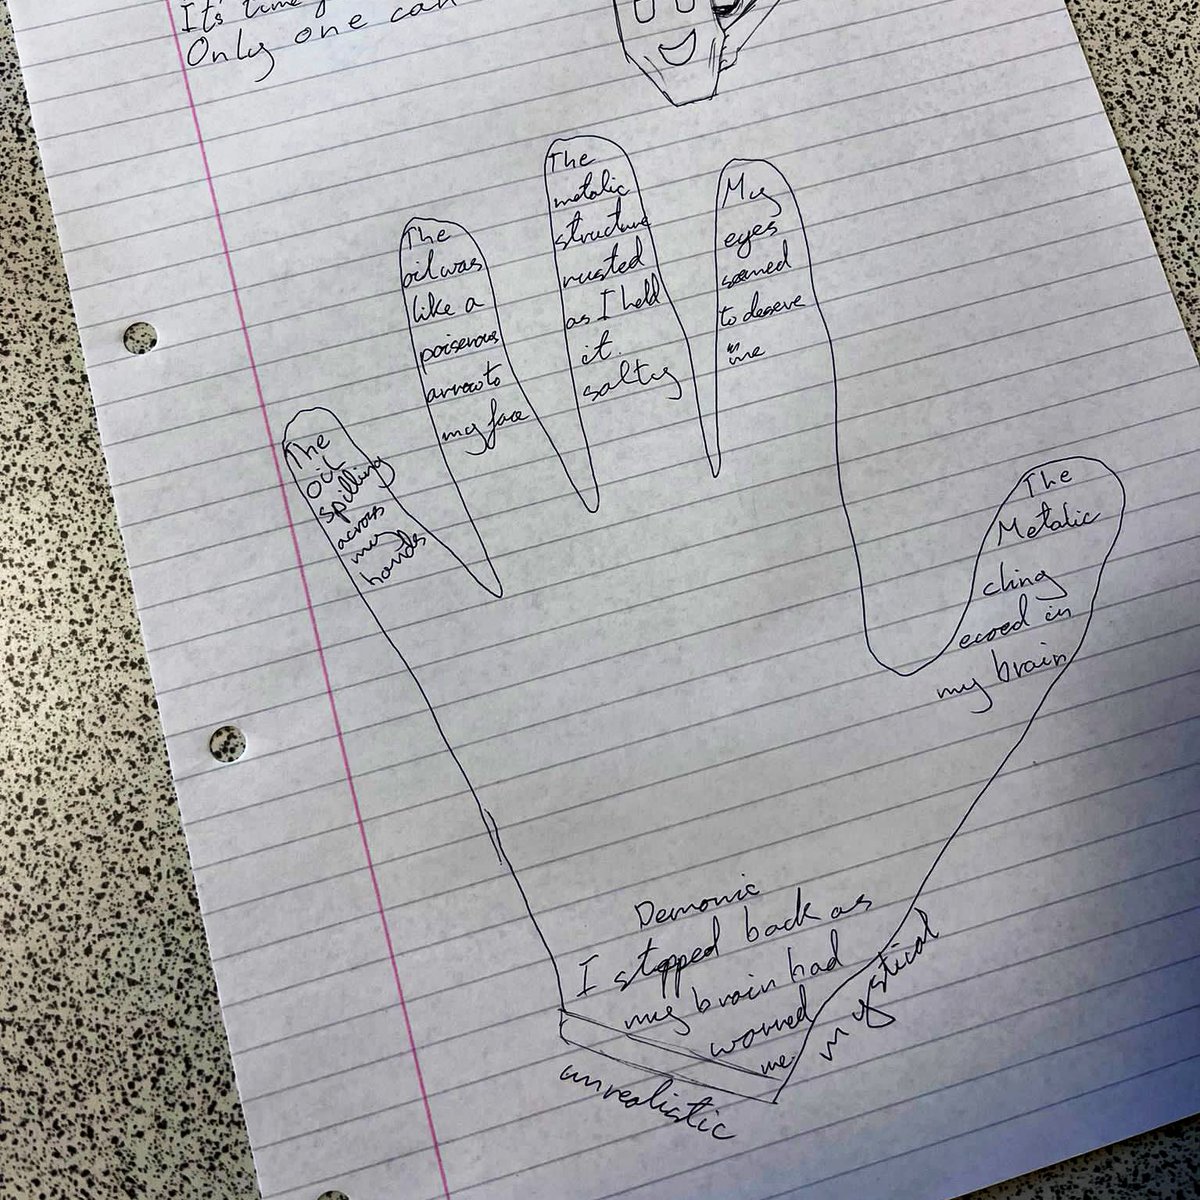 Look at this fab work from the year 8s I met today!
Planning openings and writing descriptions using senses (based on a fab @Rhian_Ivory workshop I did a couple of years ago 🥰 #authorvisit #writingworkshop